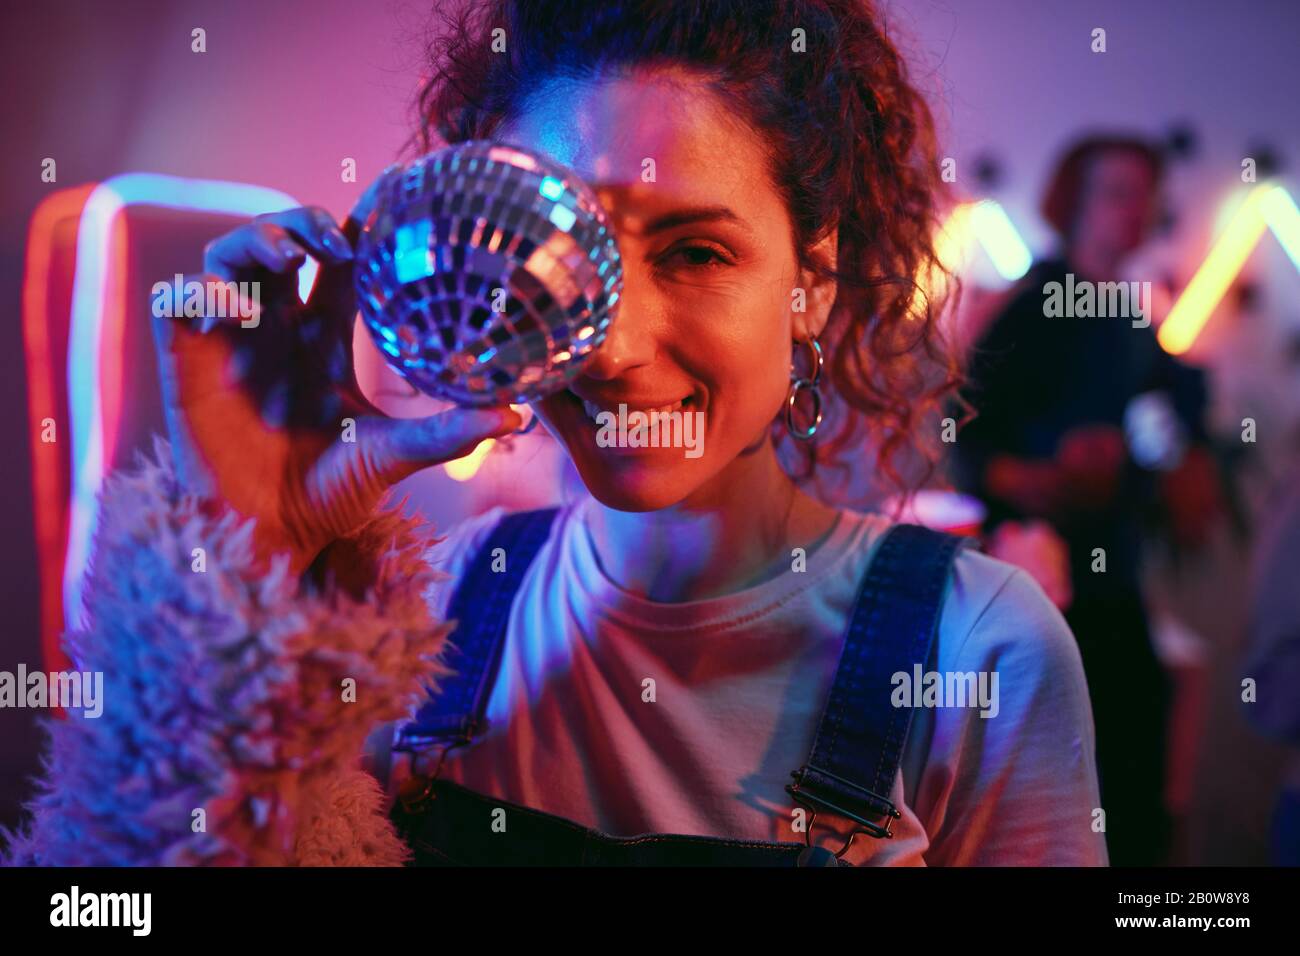 Portrait of beautiful smiling woman posing at camera with disco ball during disco party Stock Photo